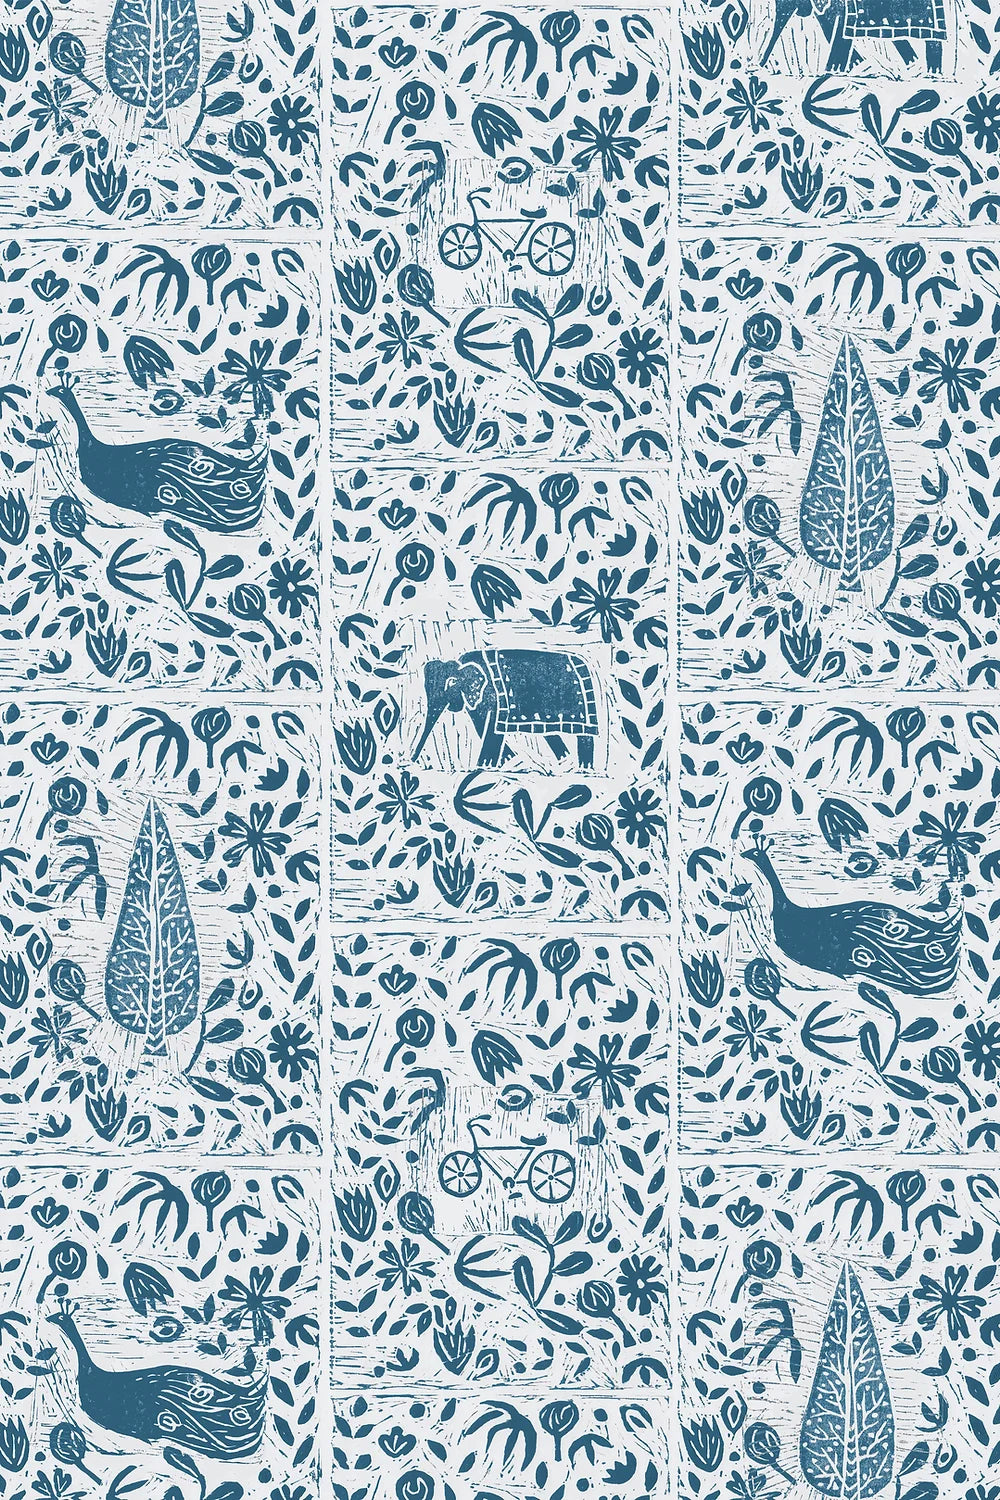 India Inspired Lino Print Fabric by Holly Woodman 